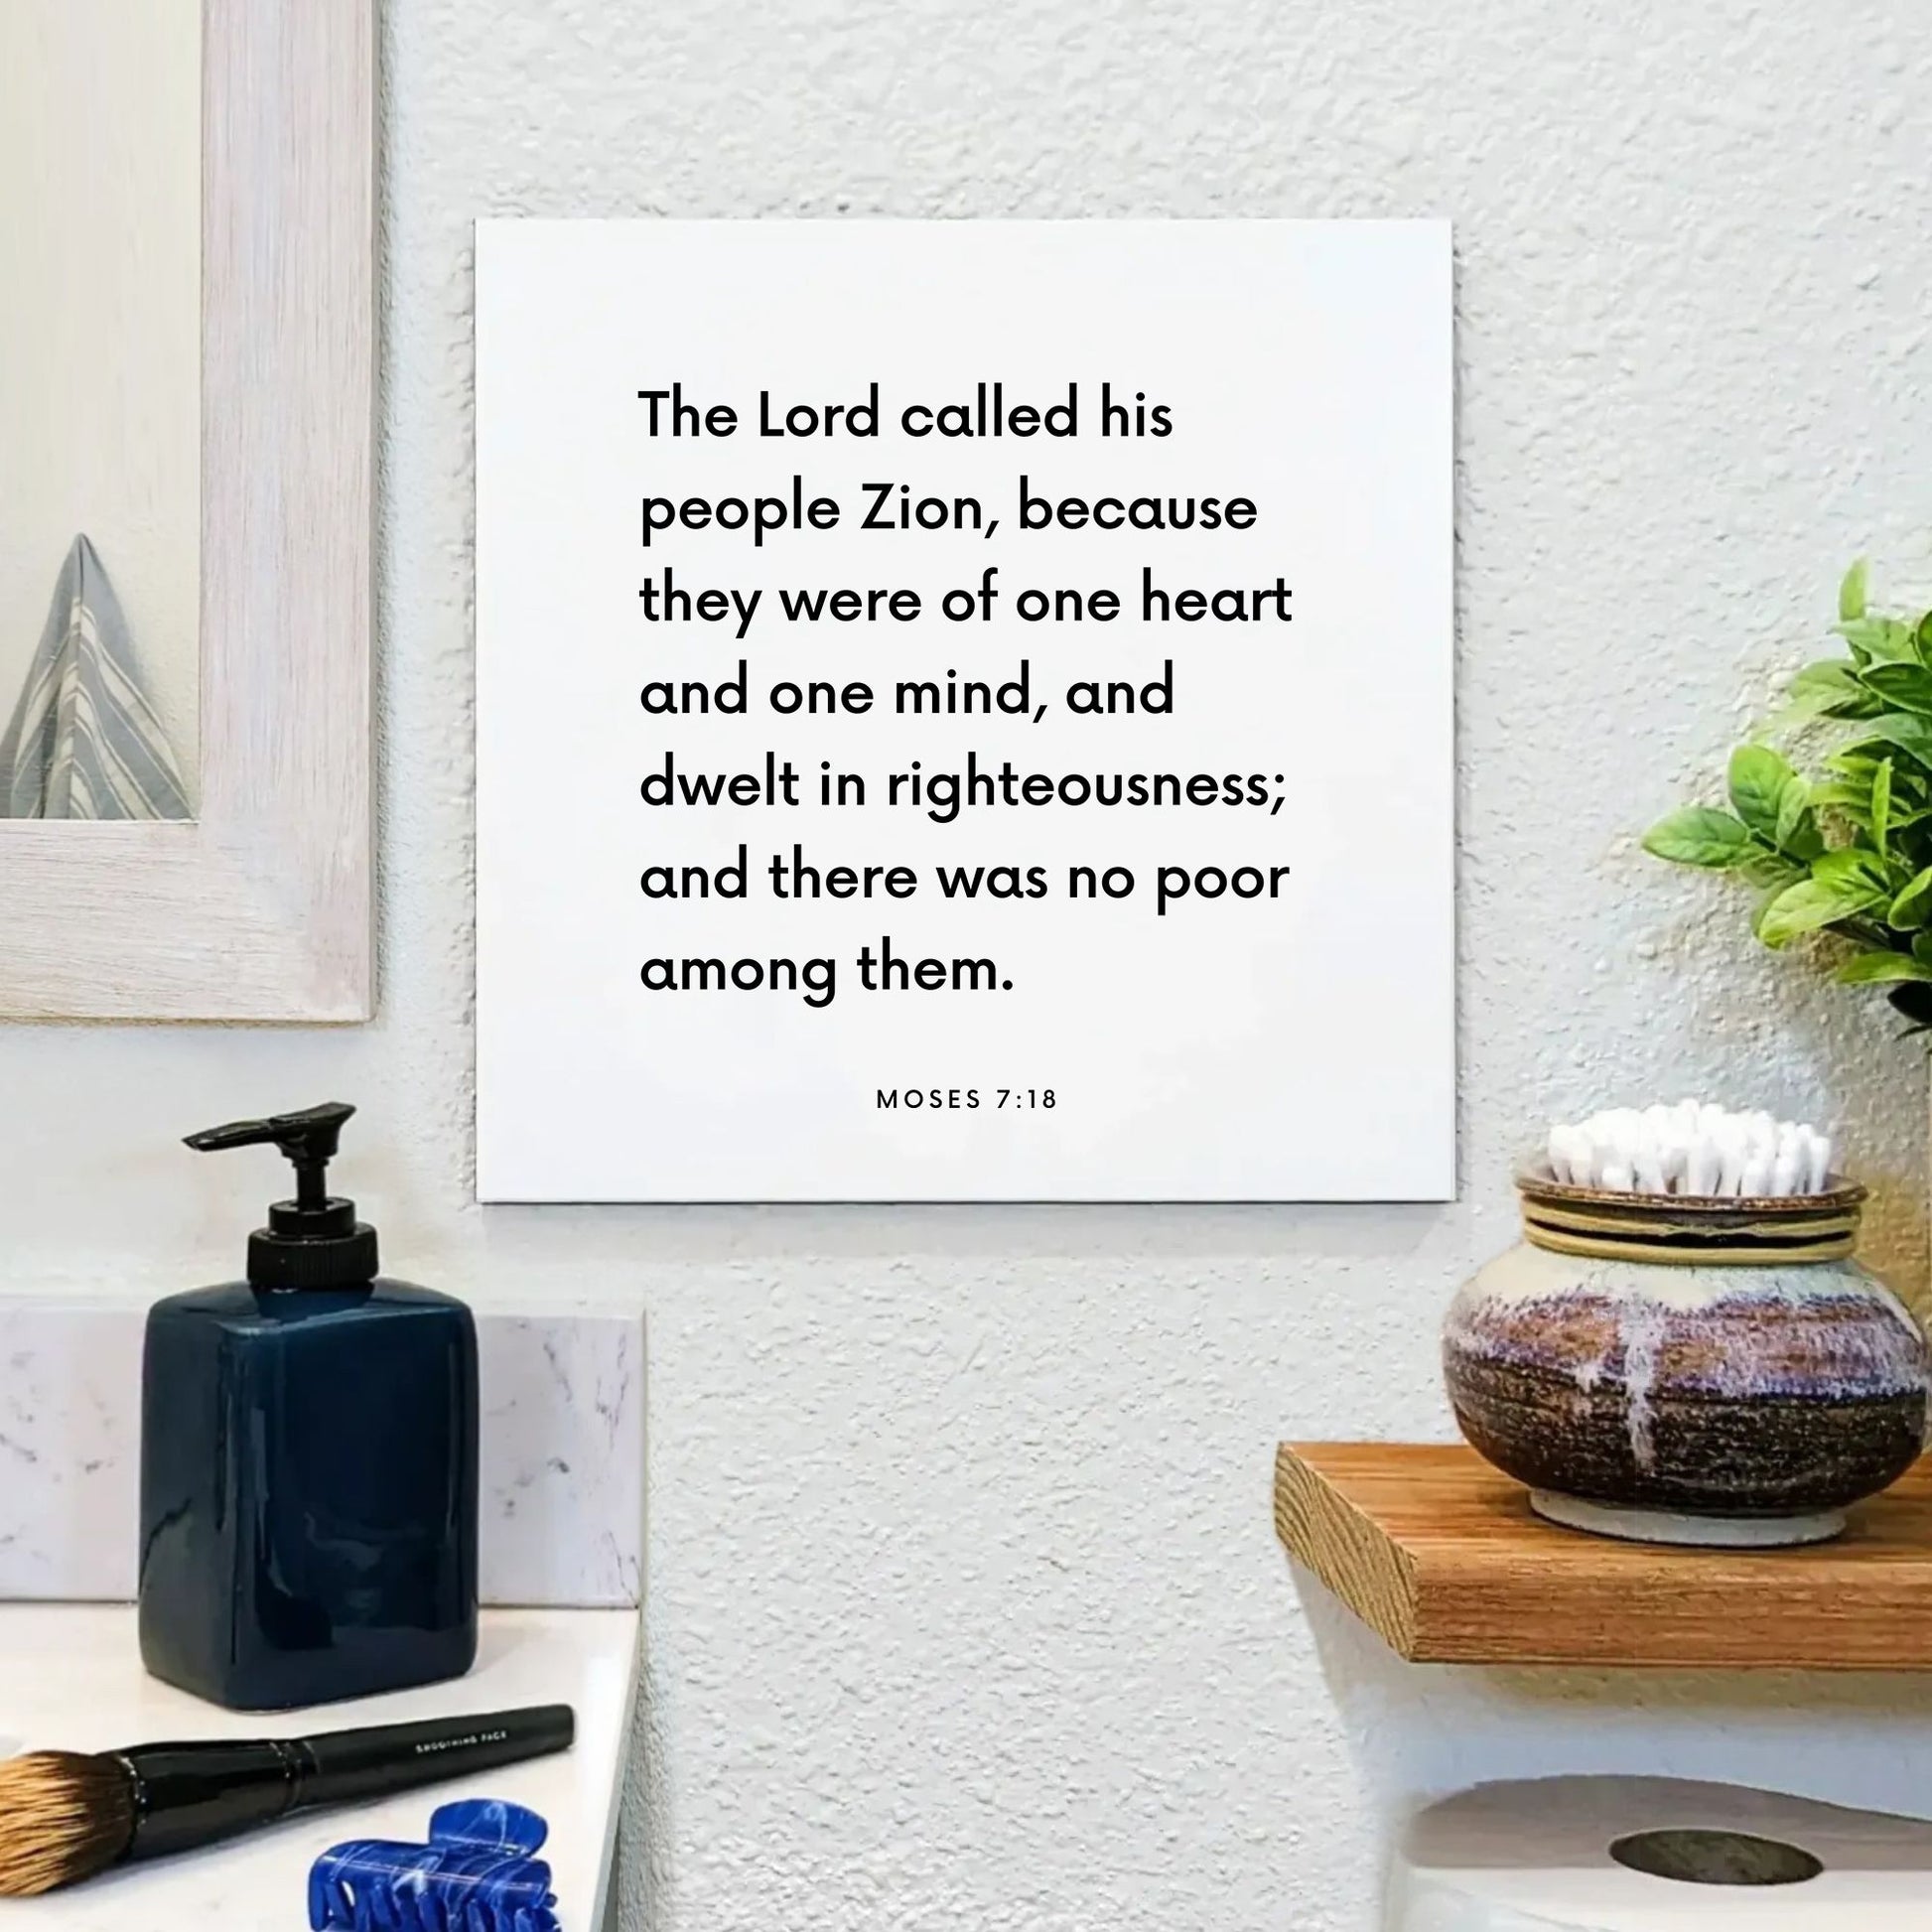 Bathroom mouting of the scripture tile for Moses 7:18 - "Because they were of one heart and one mind"